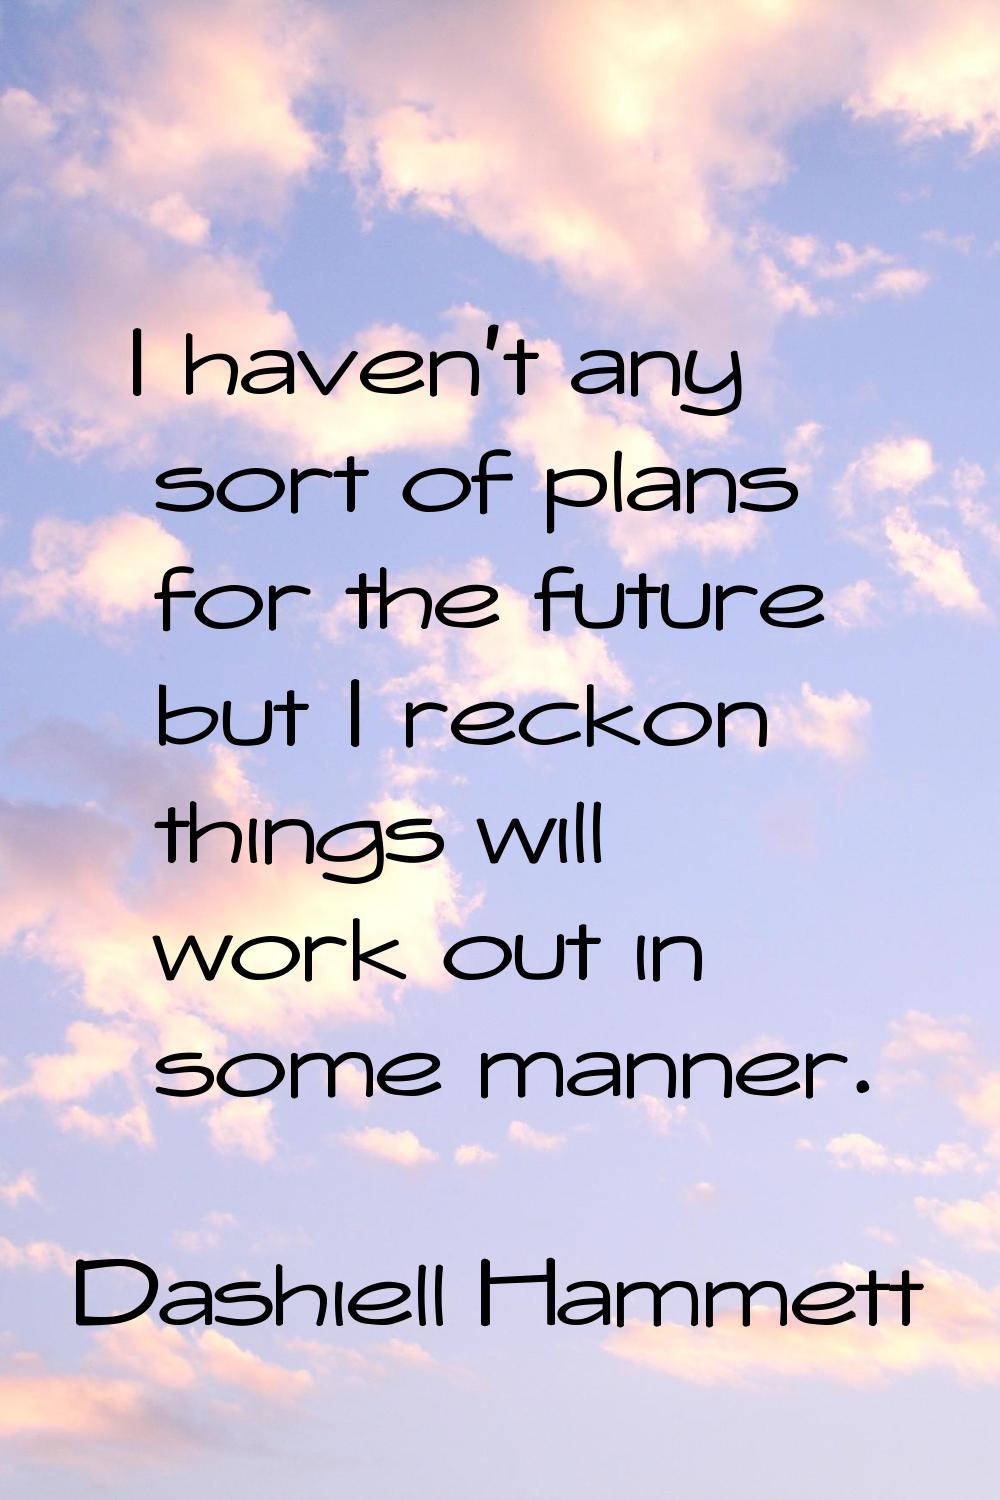 I haven't any sort of plans for the future but I reckon things will work out in some manner.